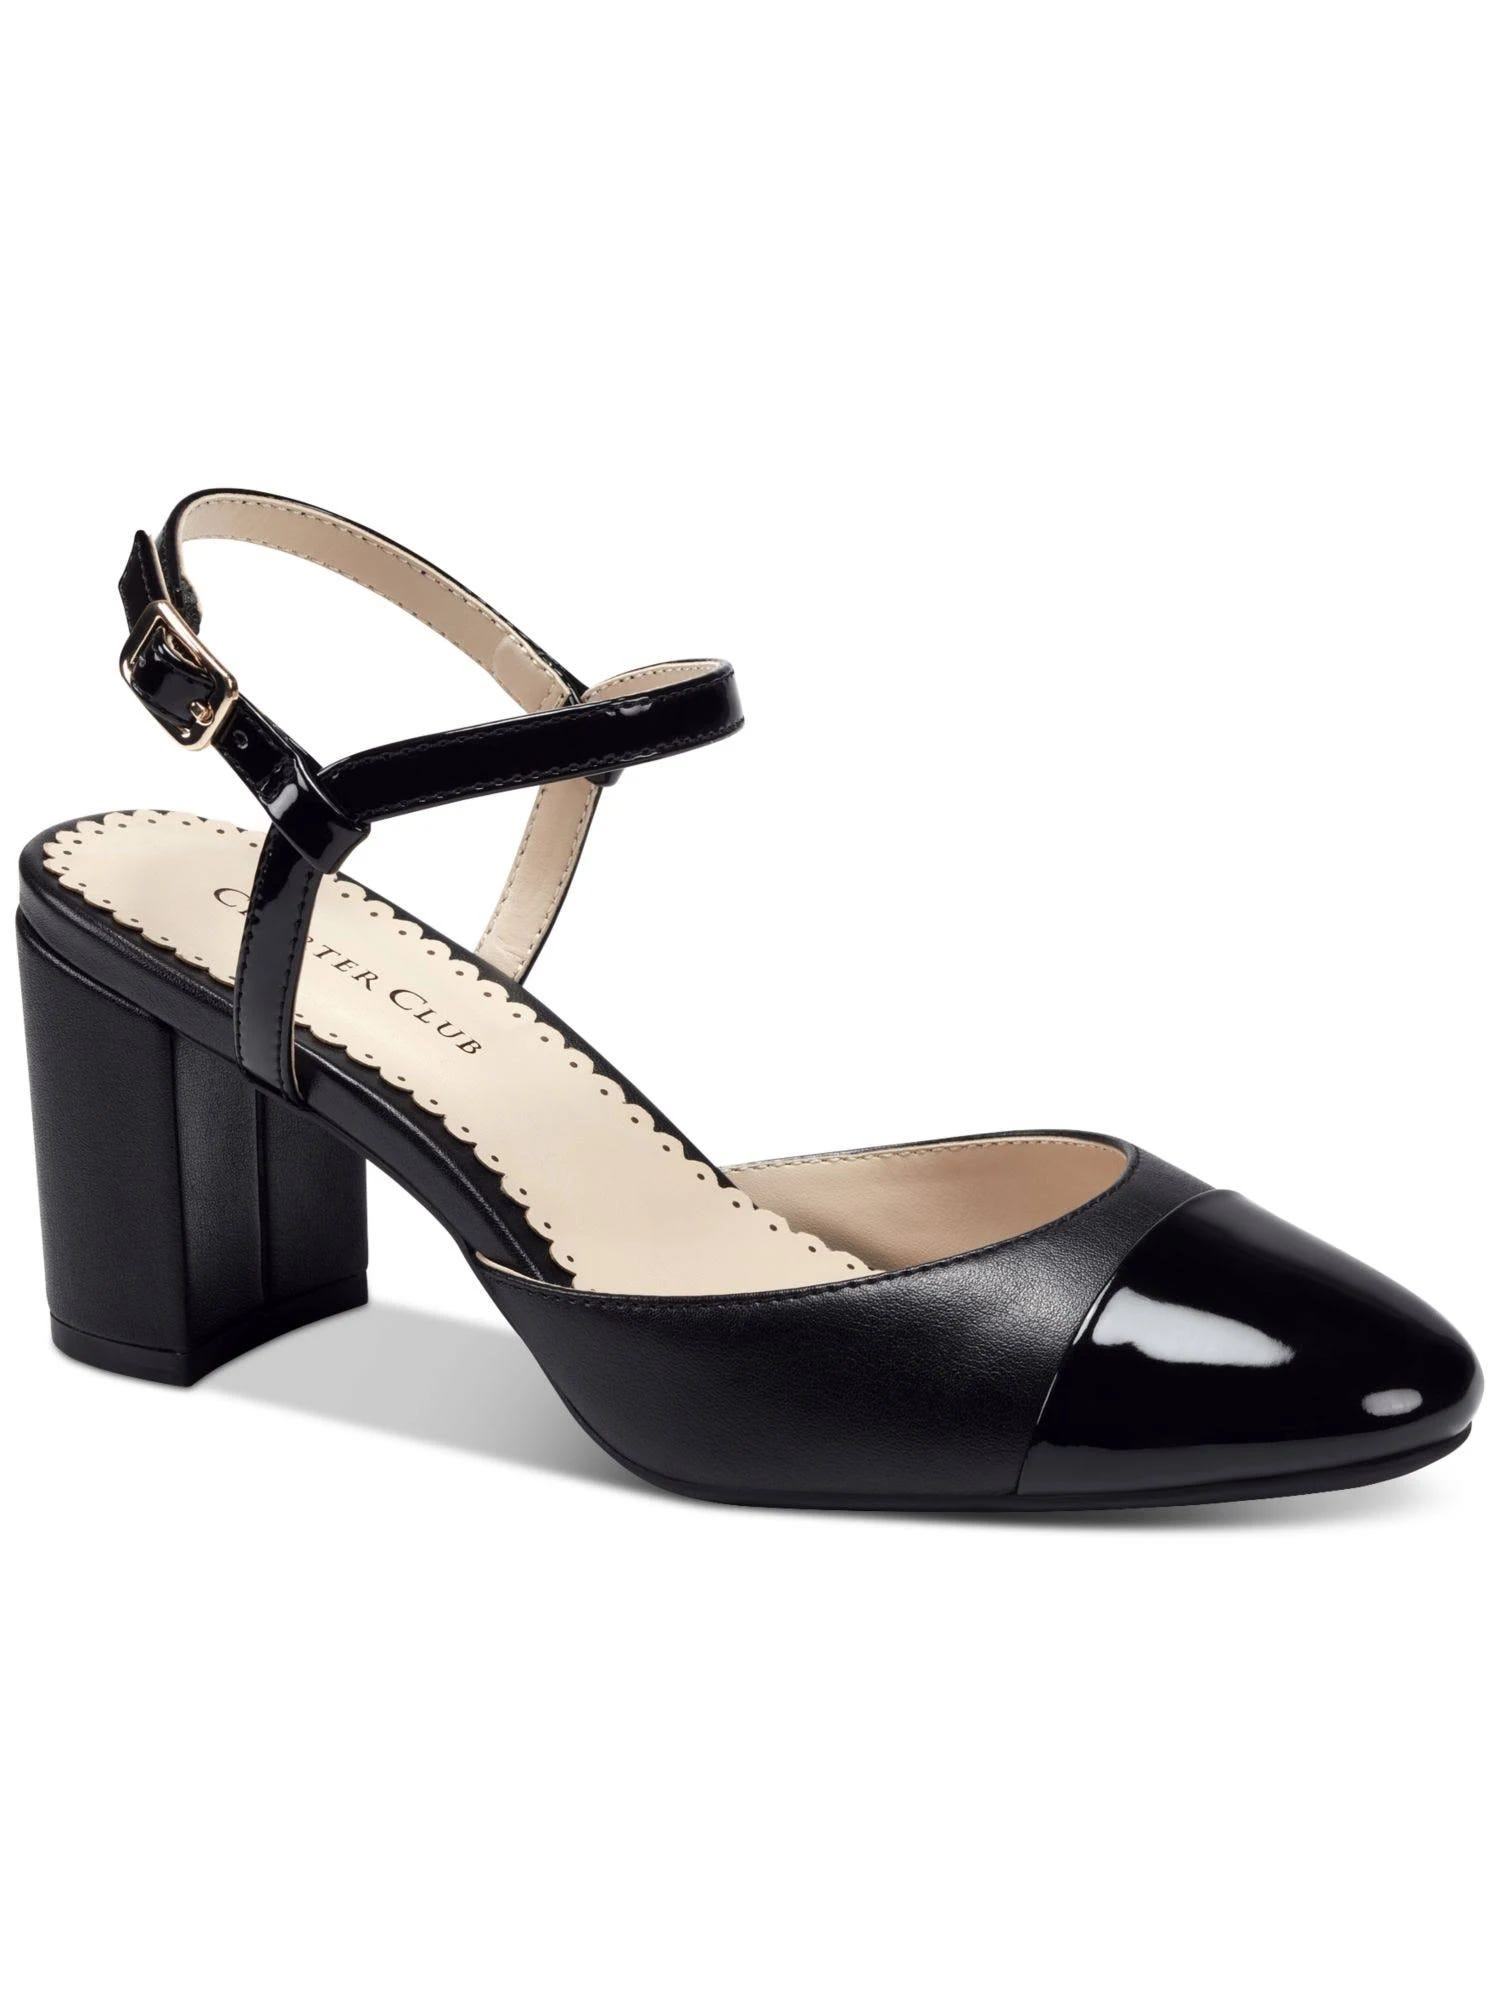 Chic Black Padded Buckle Pumps for Casual Occasions | Image